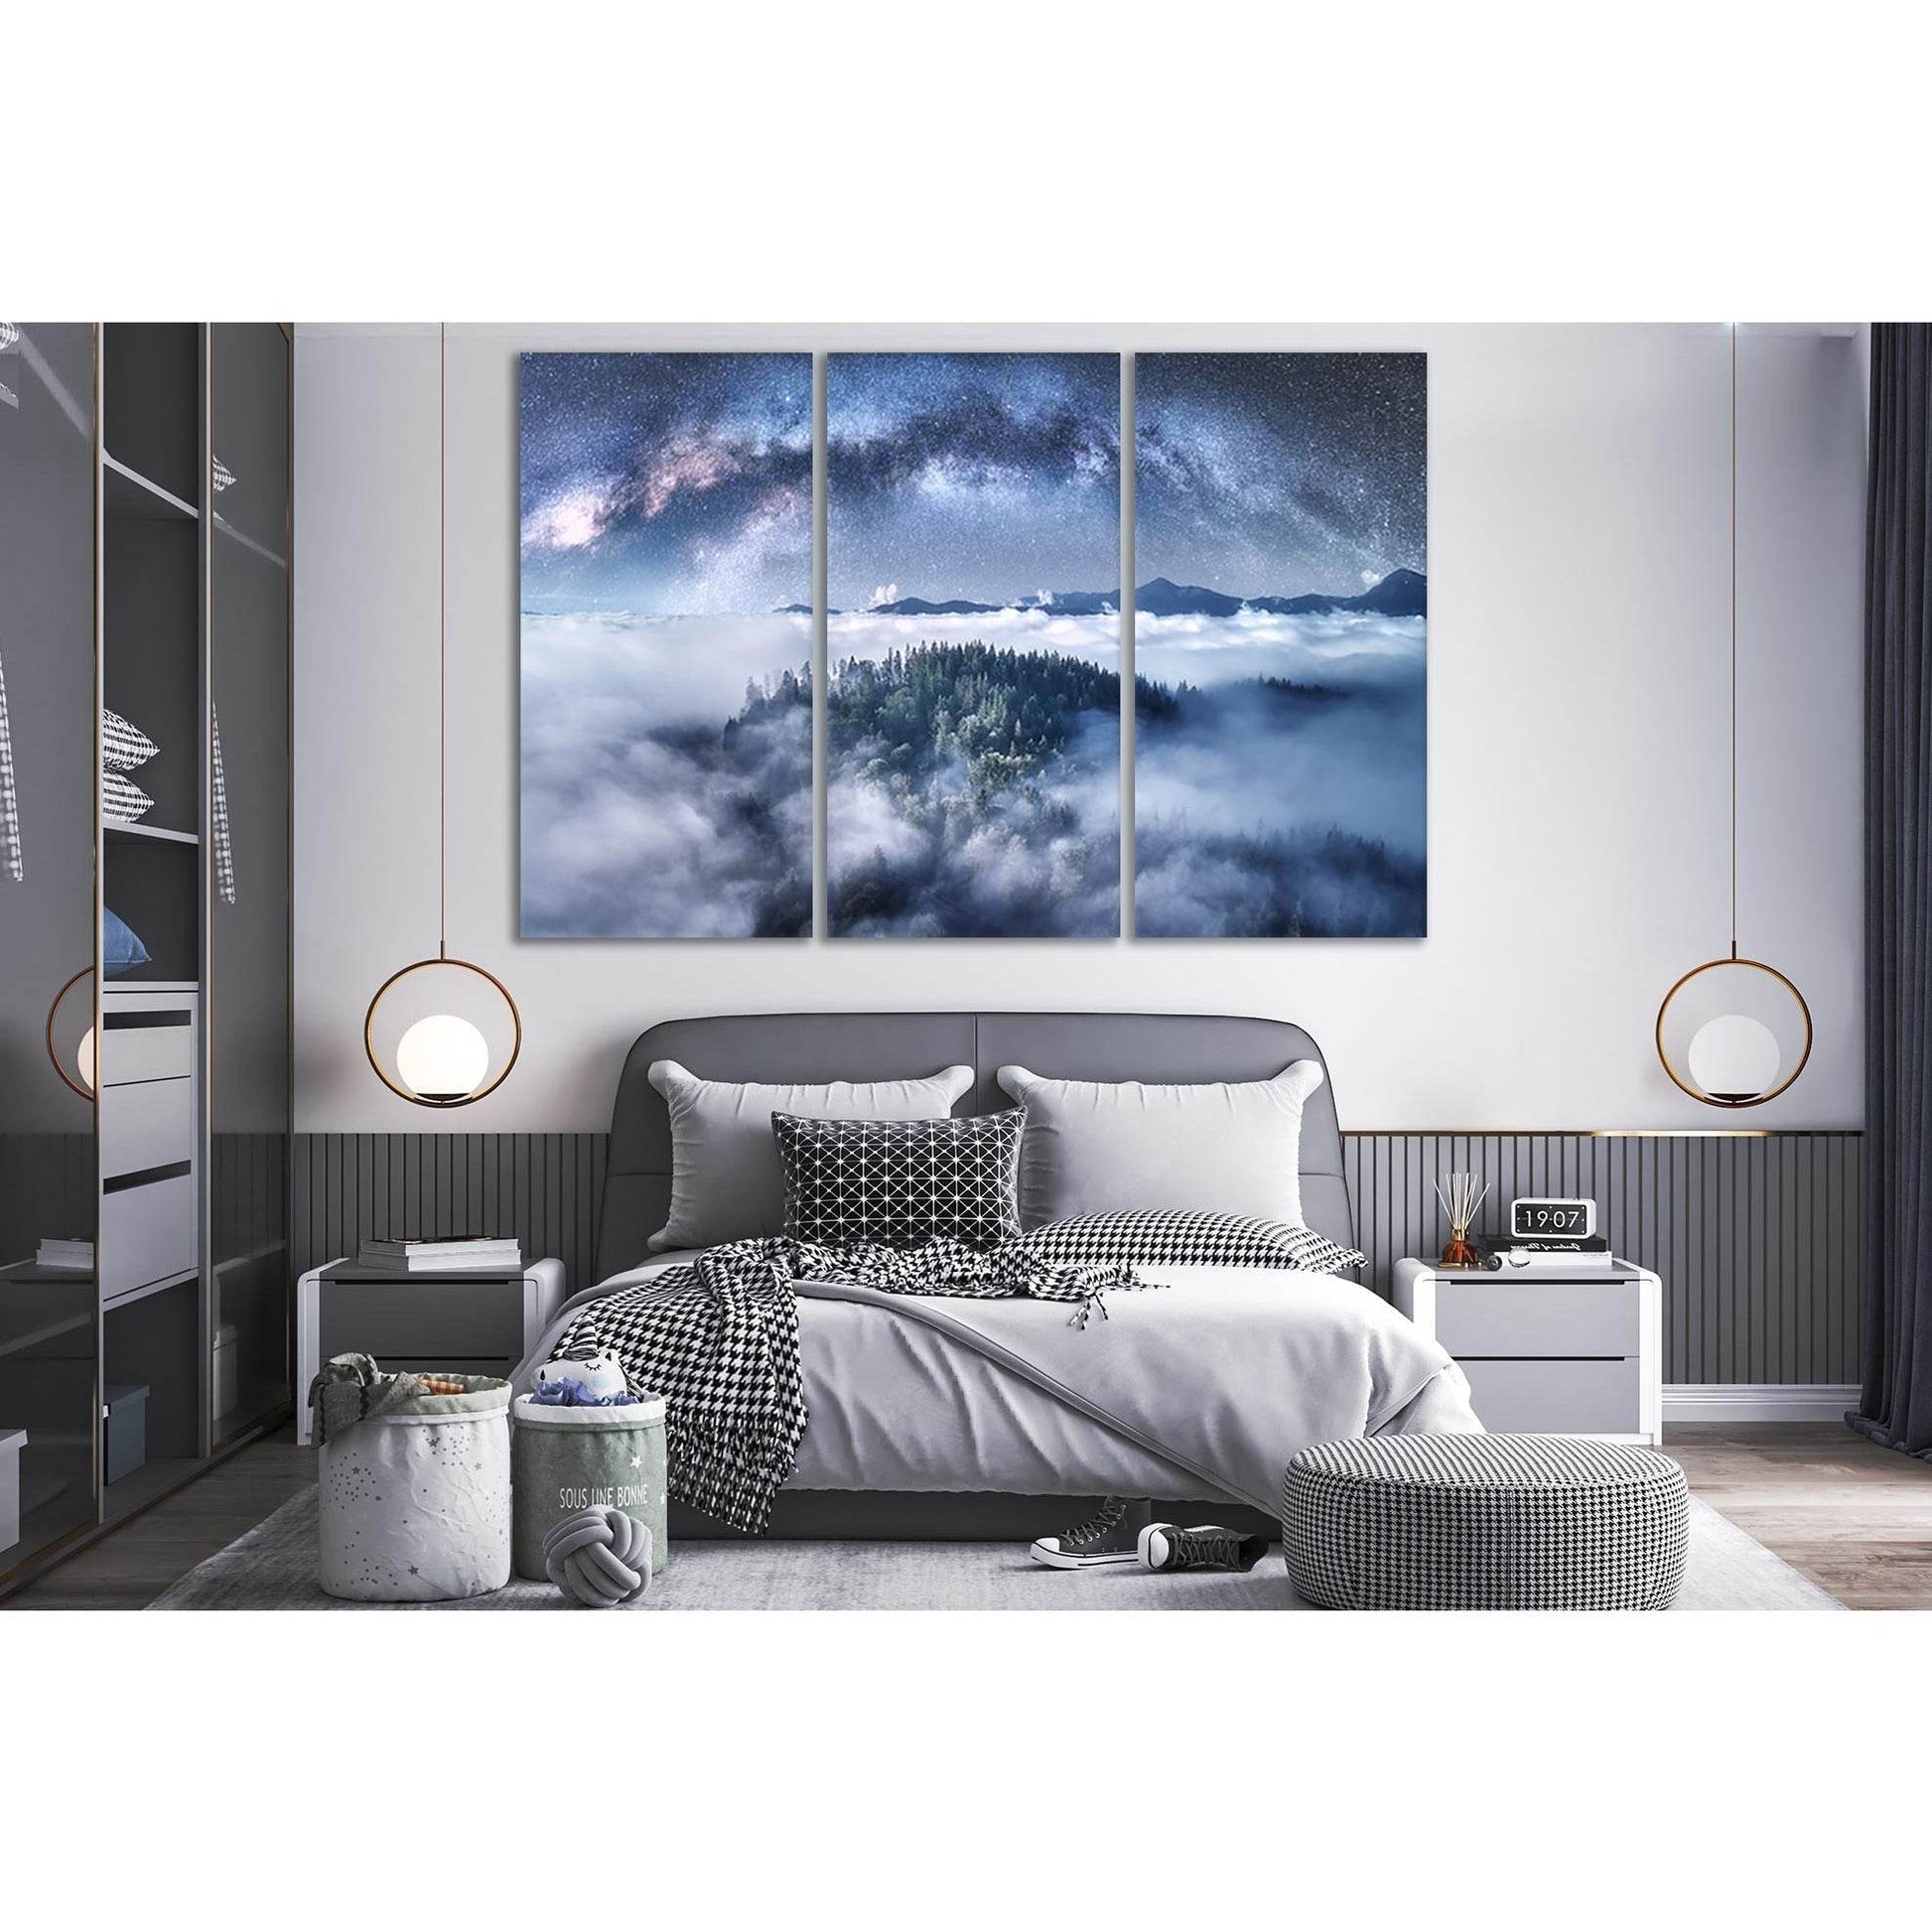 Milky Way Over The Mountains №Sl28 Ready to Hang Canvas PrintThis canvas print captures a breathtaking scene of a star-studded sky blanketing a mystical forest shrouded in mist. The cool color palette and serene landscape make this wall art a perfect matc